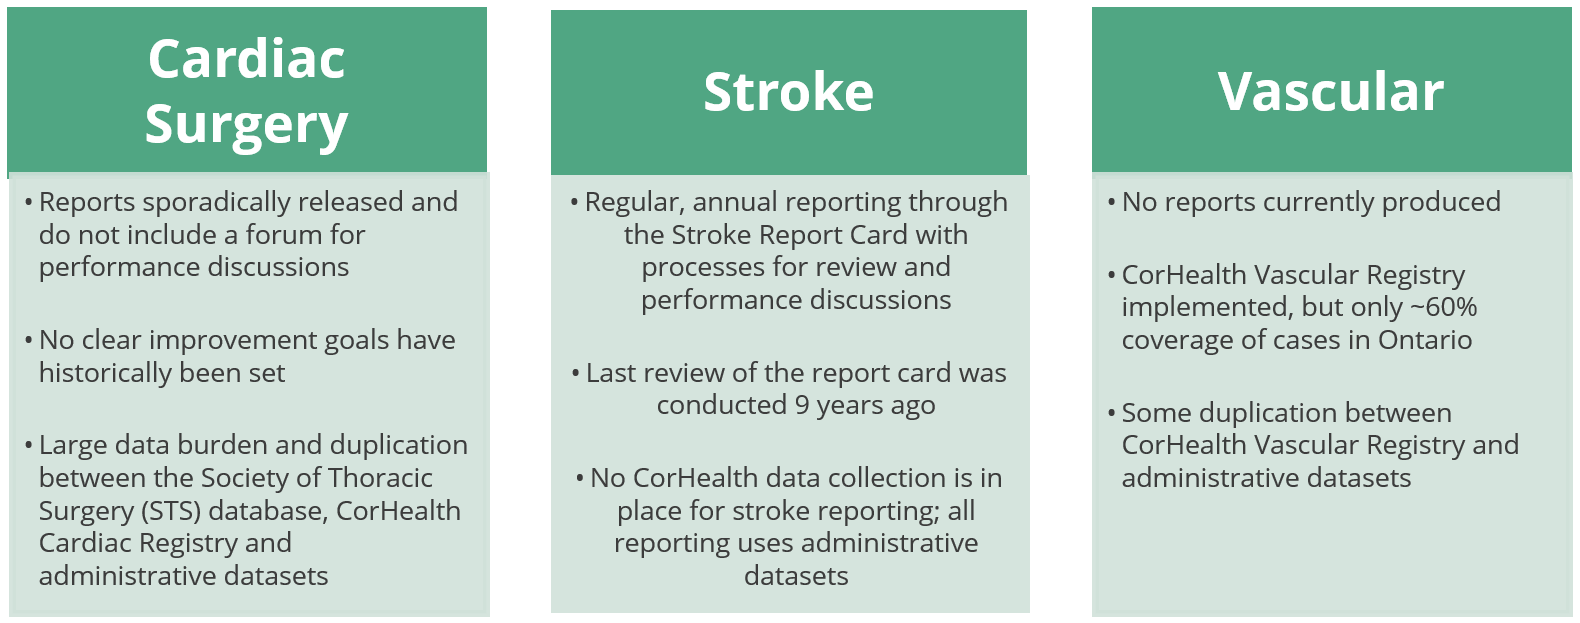 Current State of Cardiac Surgery, Stroke and Vascular reporting at CorHealth Ontario